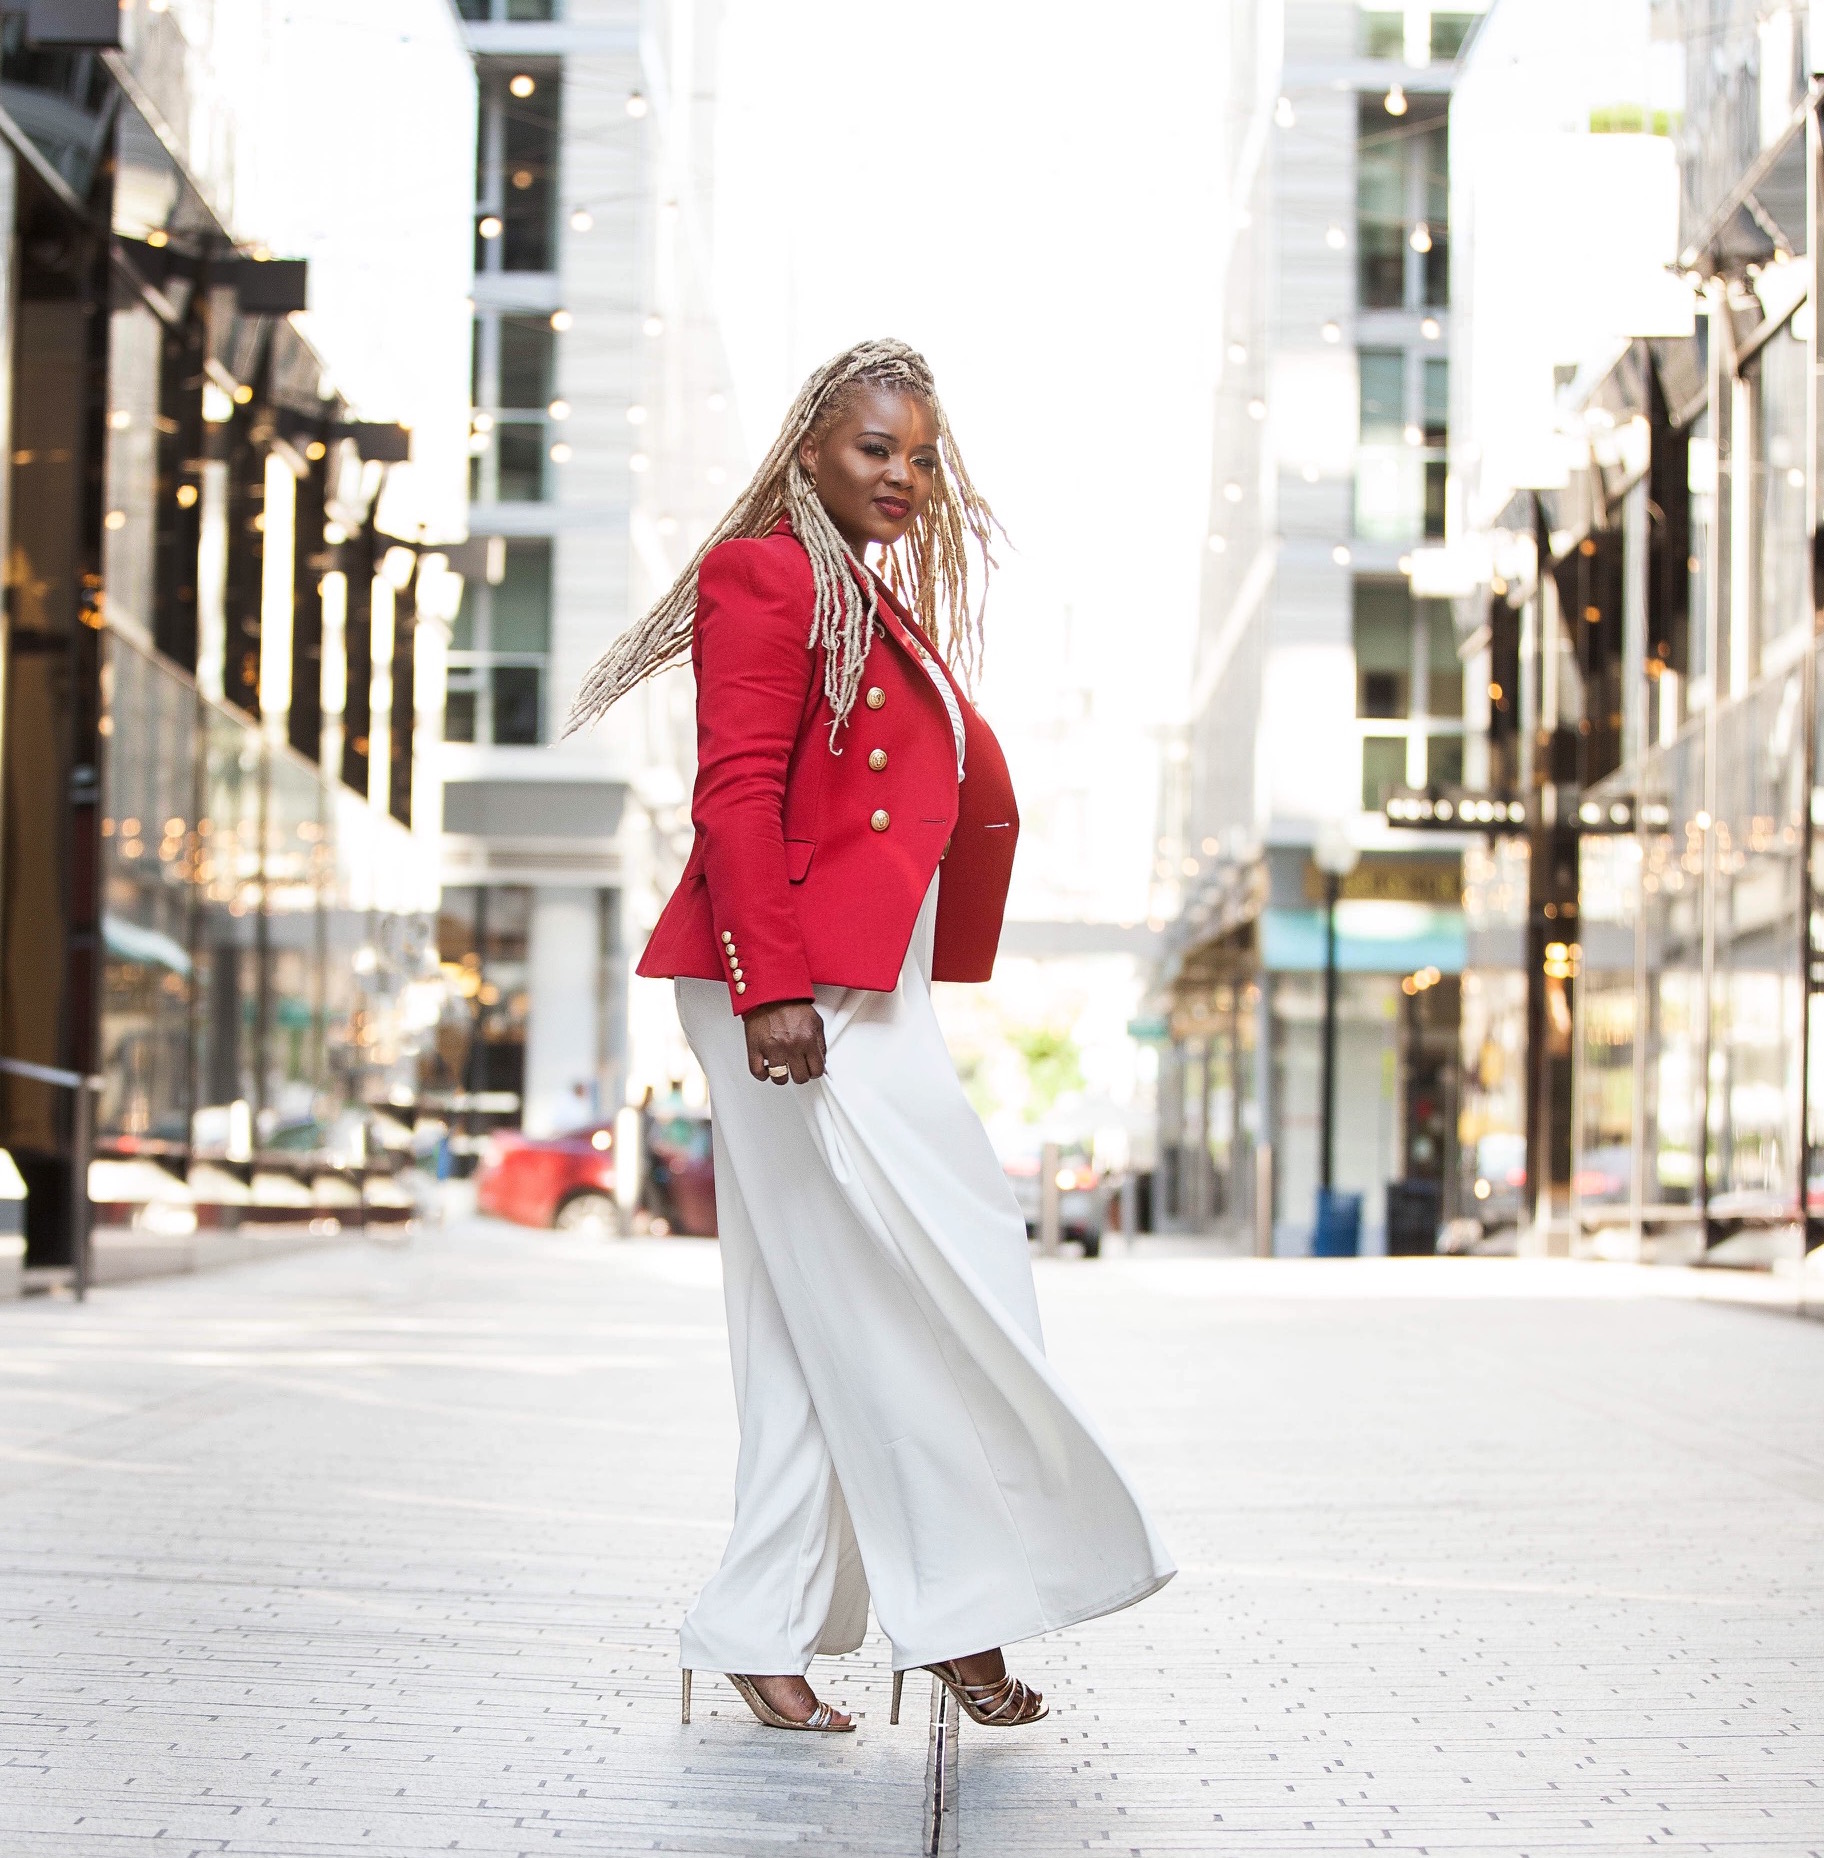 claire-sulmers-fashion-bomb-daily-how-to-wear-a-red-balmain-blazer-a-quick-note-about-respect-fashion-bomb-daily